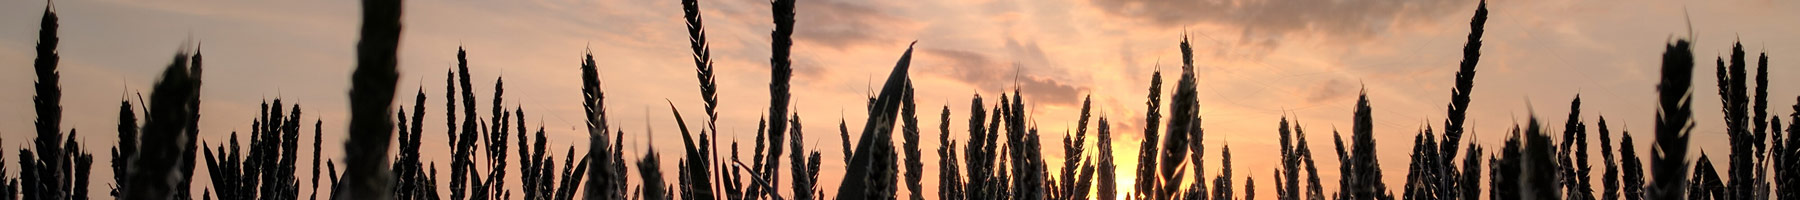 Ears of wheat in a field silhouetted by a lavendar and gold sunset.